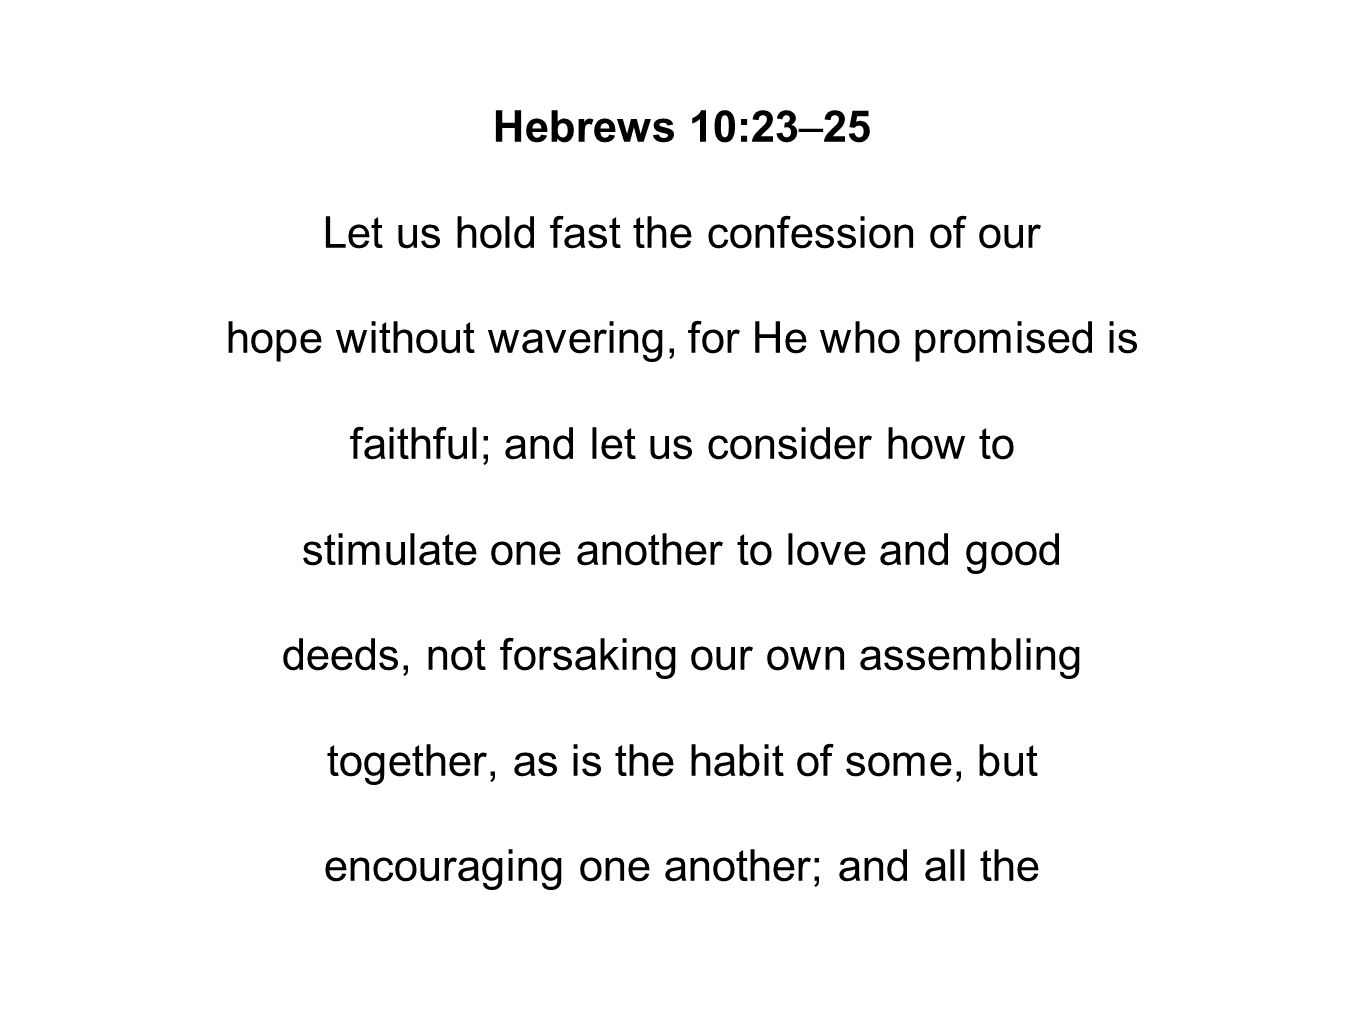 Hebrews 10:23–25 Let us hold fast the confession of our hope without wavering, for He who promised is faithful; and let us consider how to stimulate one another to love and good deeds, not forsaking our own assembling together, as is the habit of some, but encouraging one another; and all the